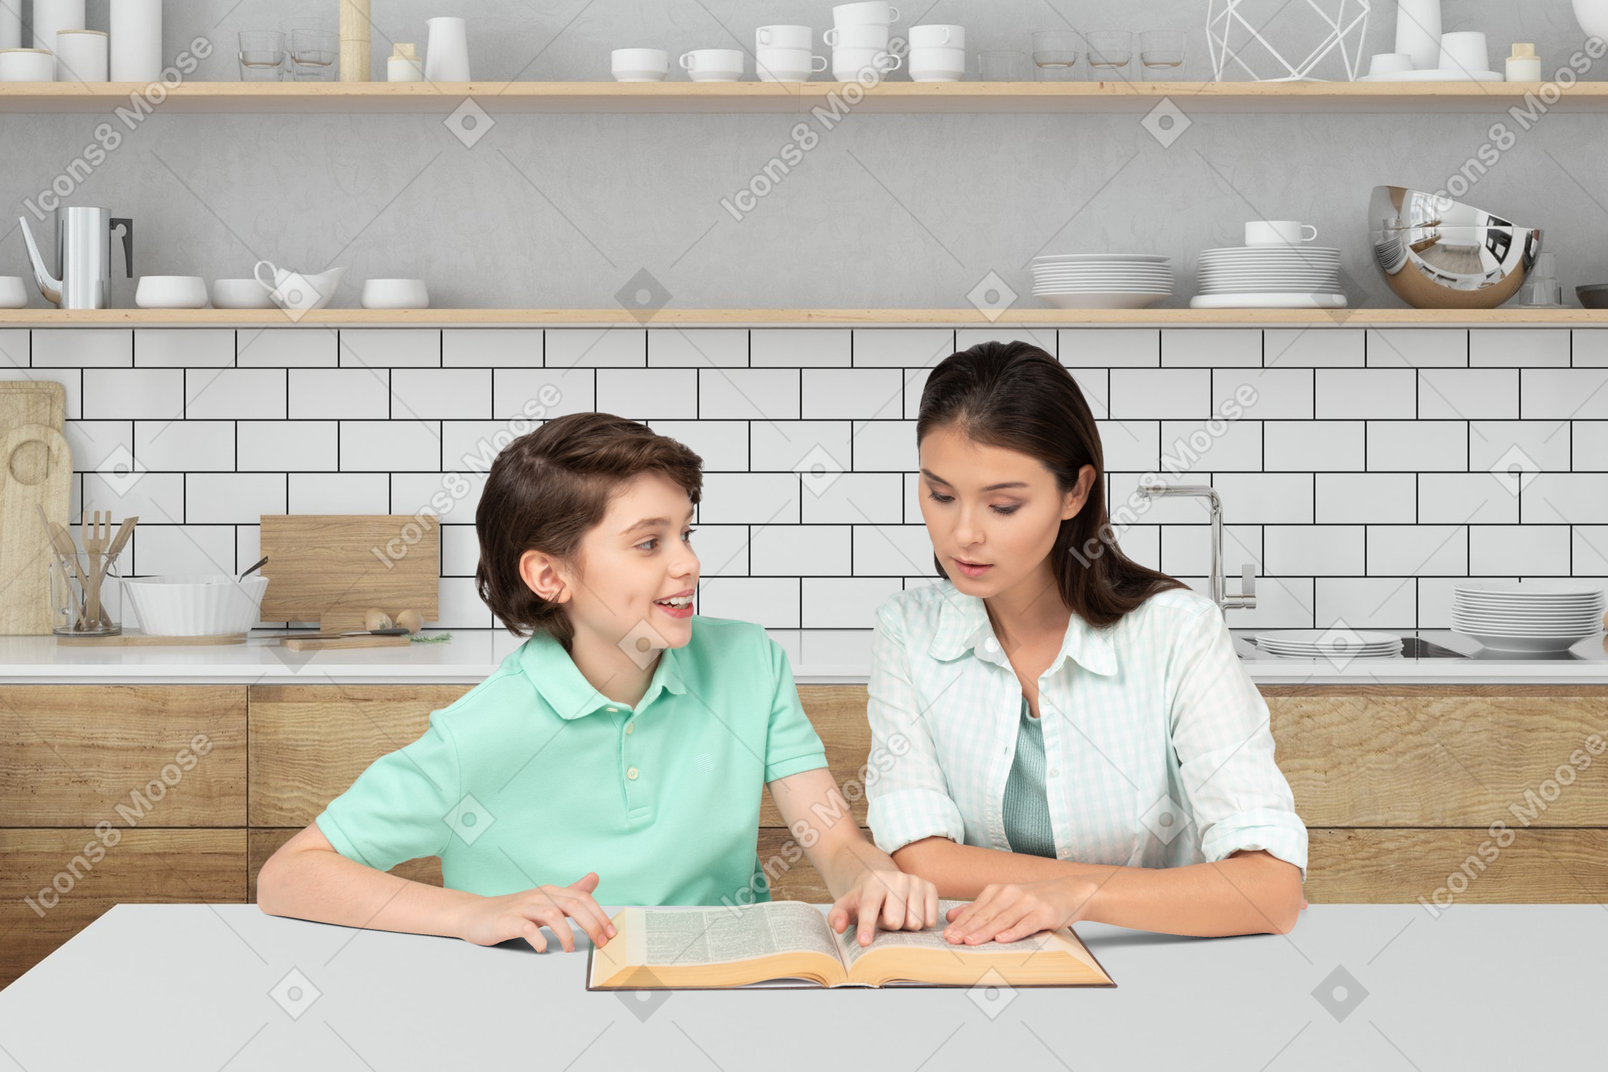 A woman and a boy reading a book in a kitchen